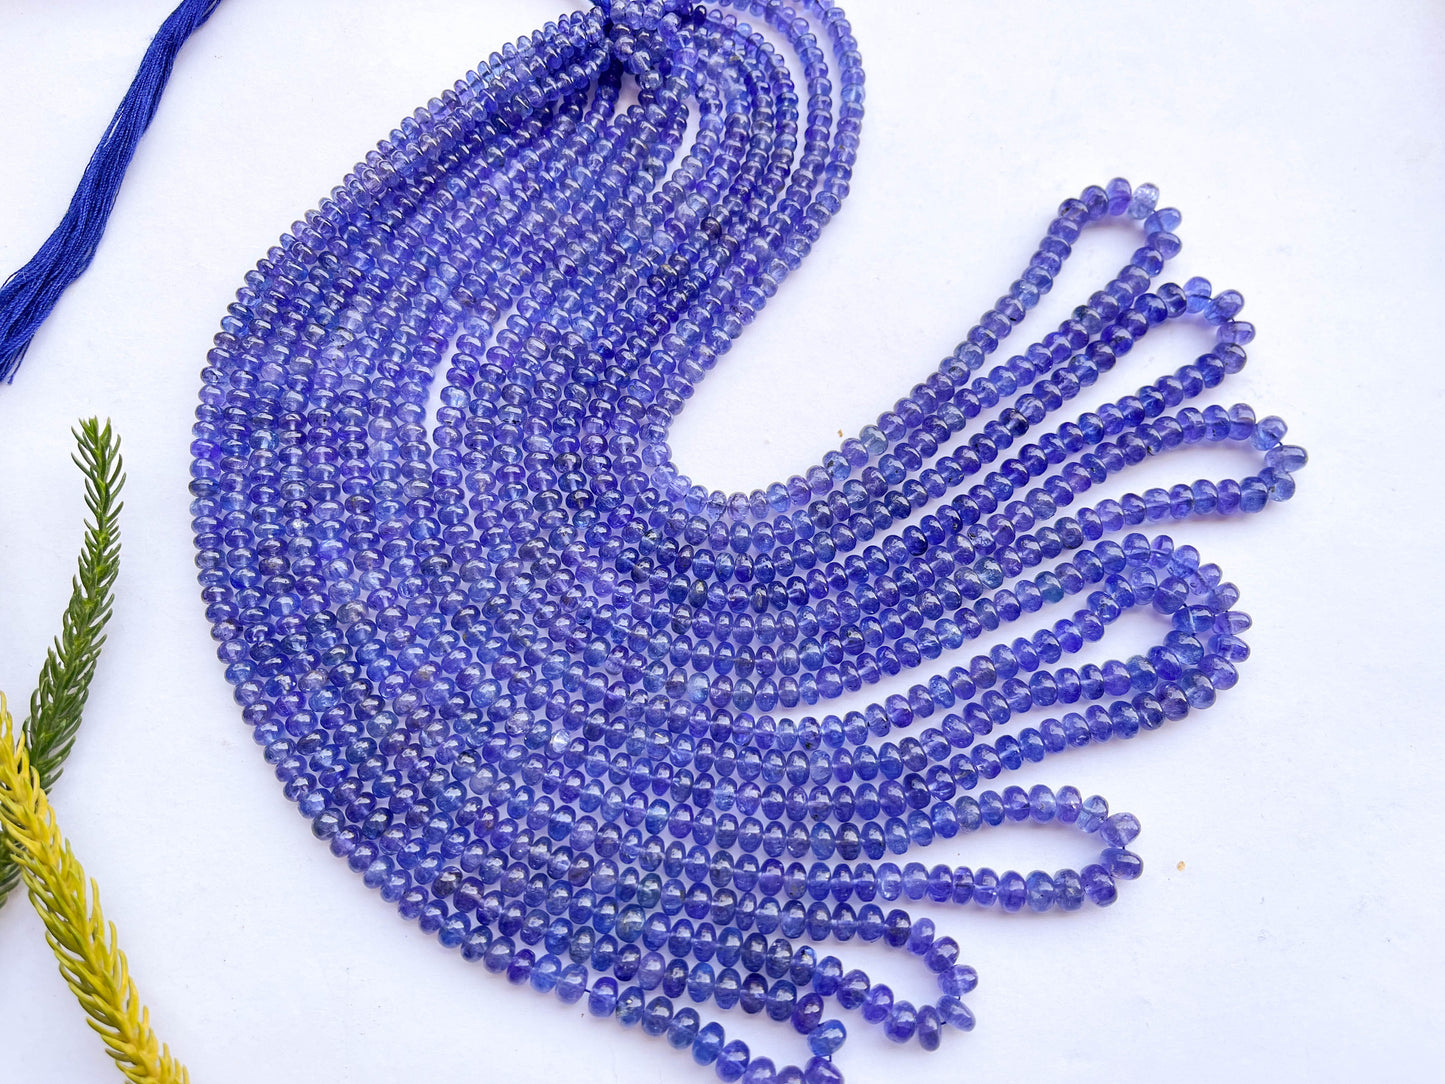 AAA Tanzanite Smooth Rondelle Beads, 17 Inch, 4mm to 6mm, Natural Tanzanite Gemstone Beadsforyourjewelry